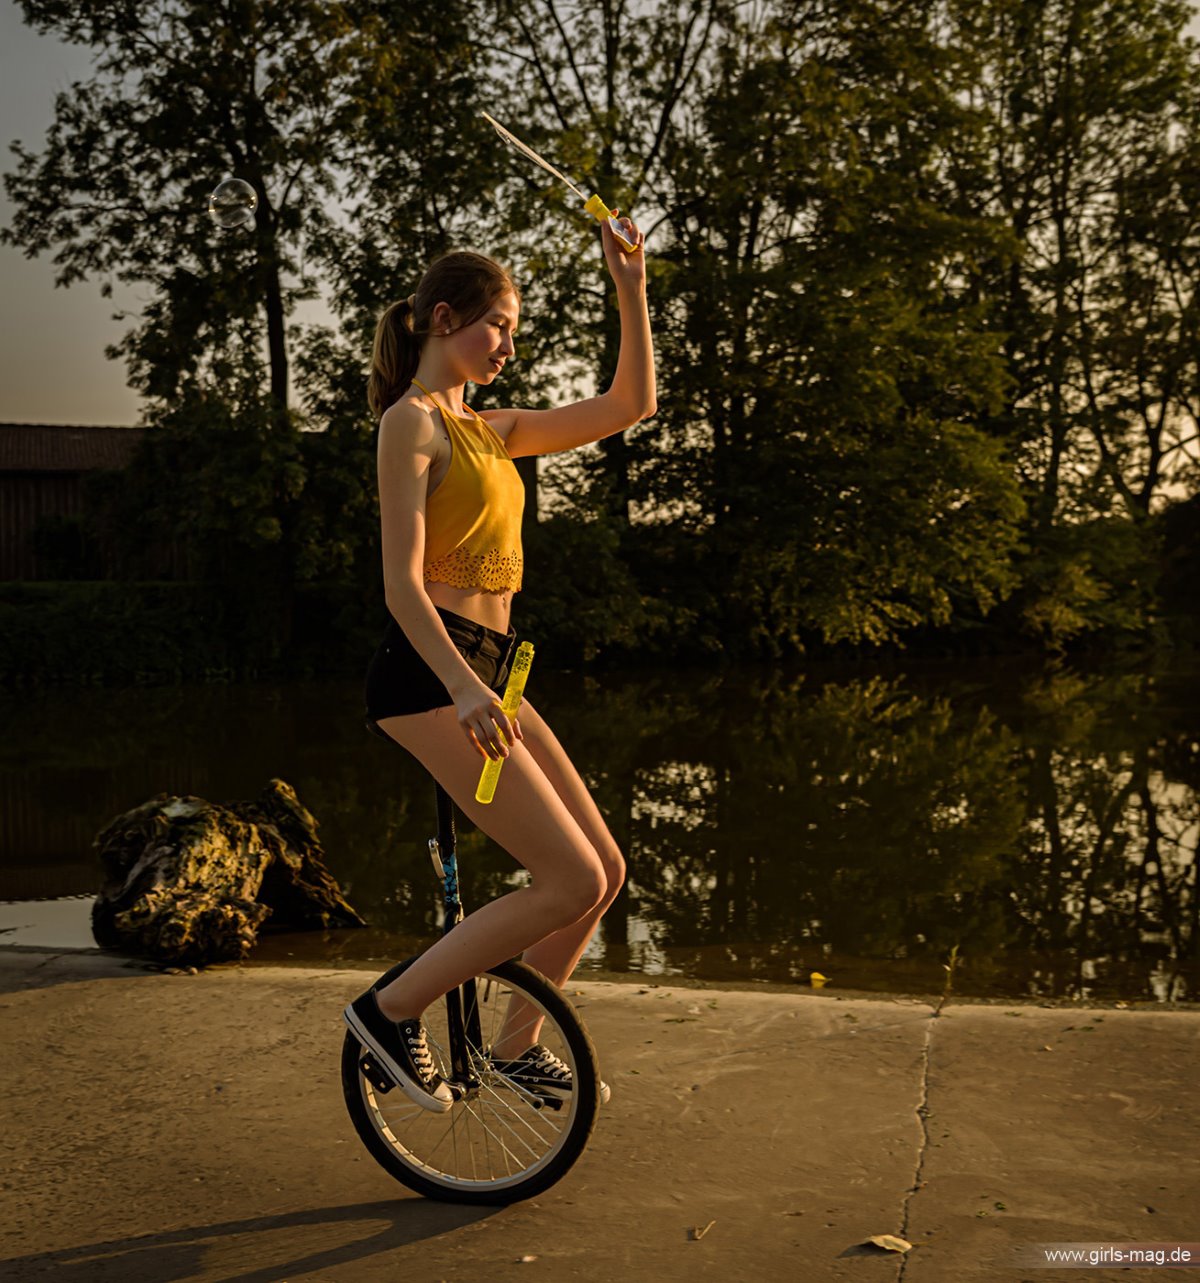 Girls Mag Annika Bubbles on a Unicycle 0120 5828013916.jpg